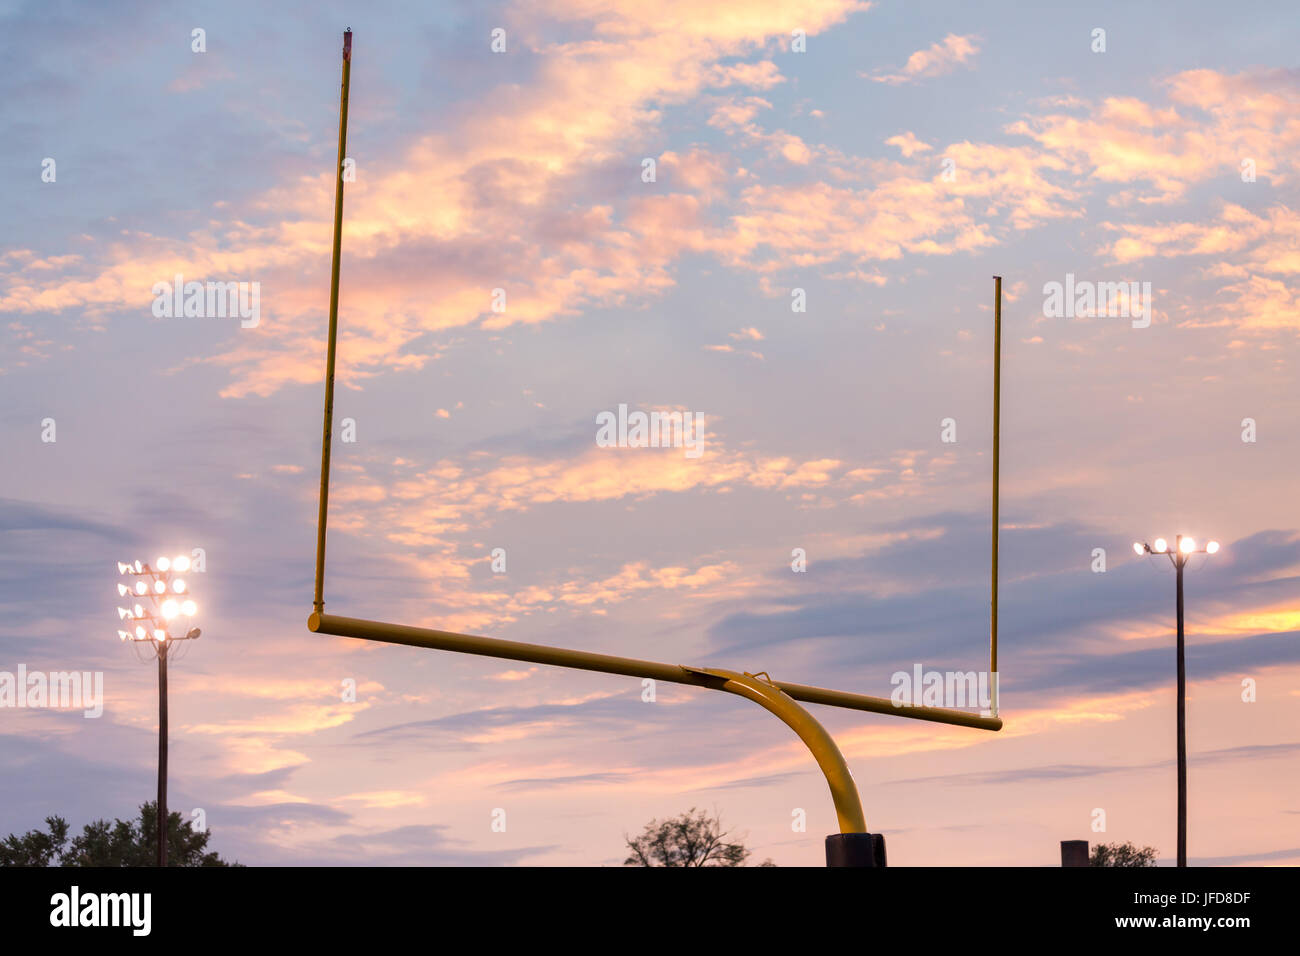 American football goal posts against sunset Stock Photo